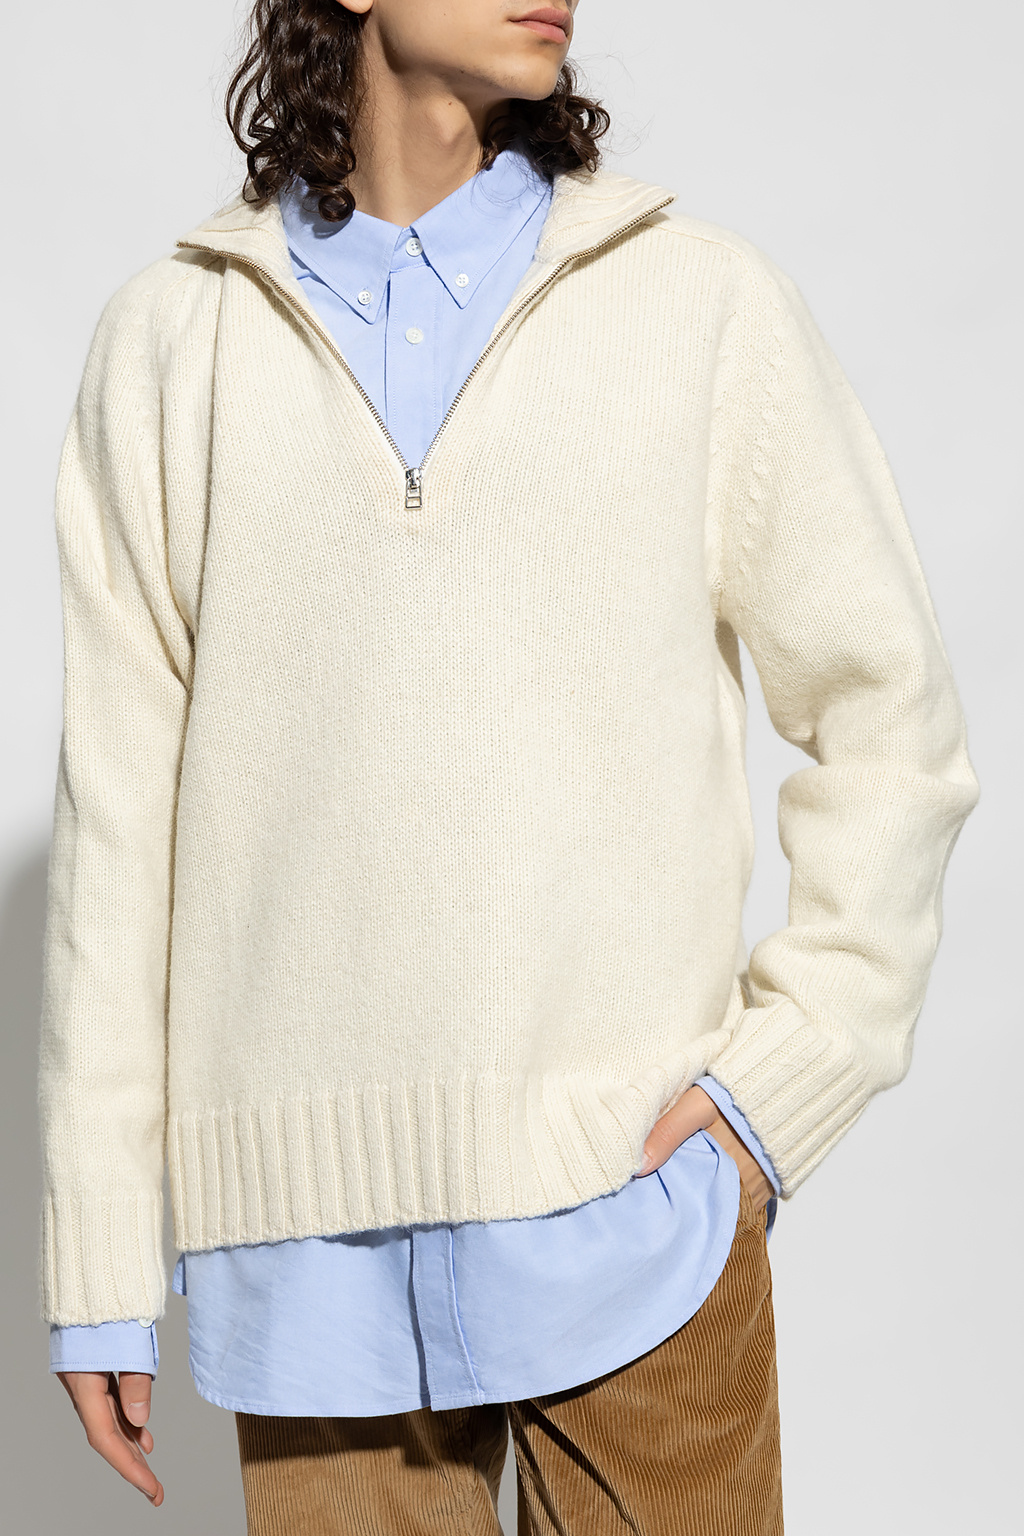 Norse Projects ‘Bruno’ Core sweater